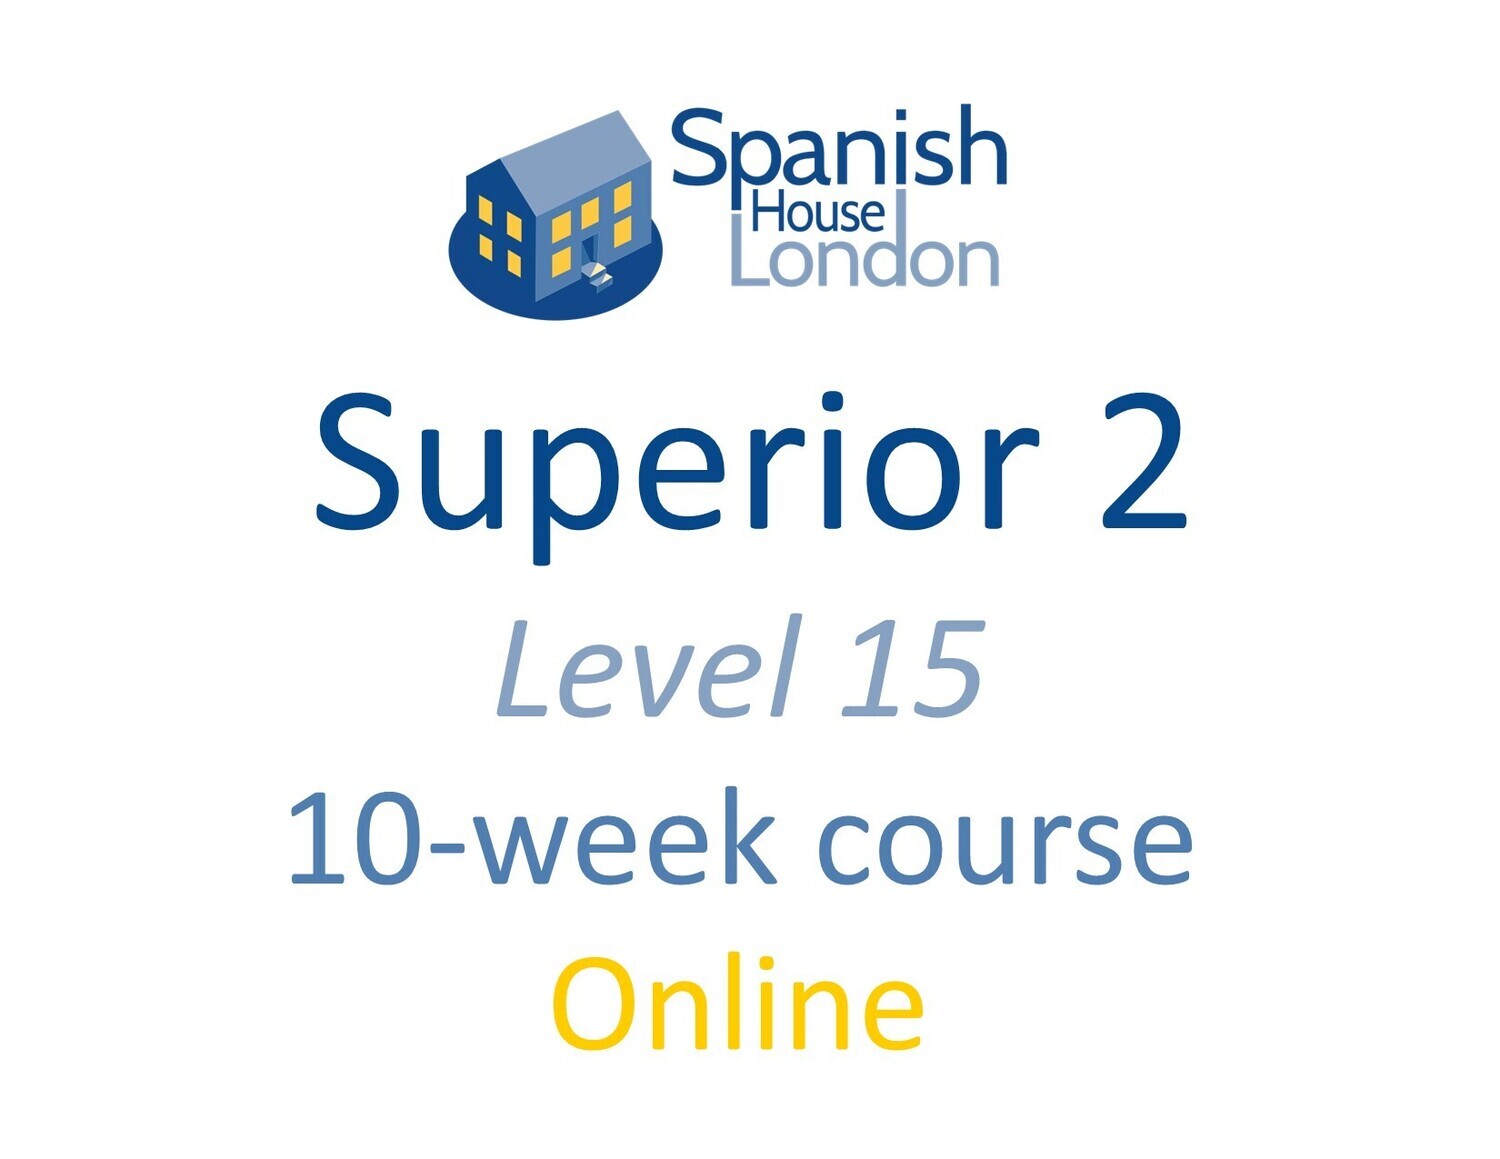 Superior 2 Course starting on 2nd August at 7.30pm